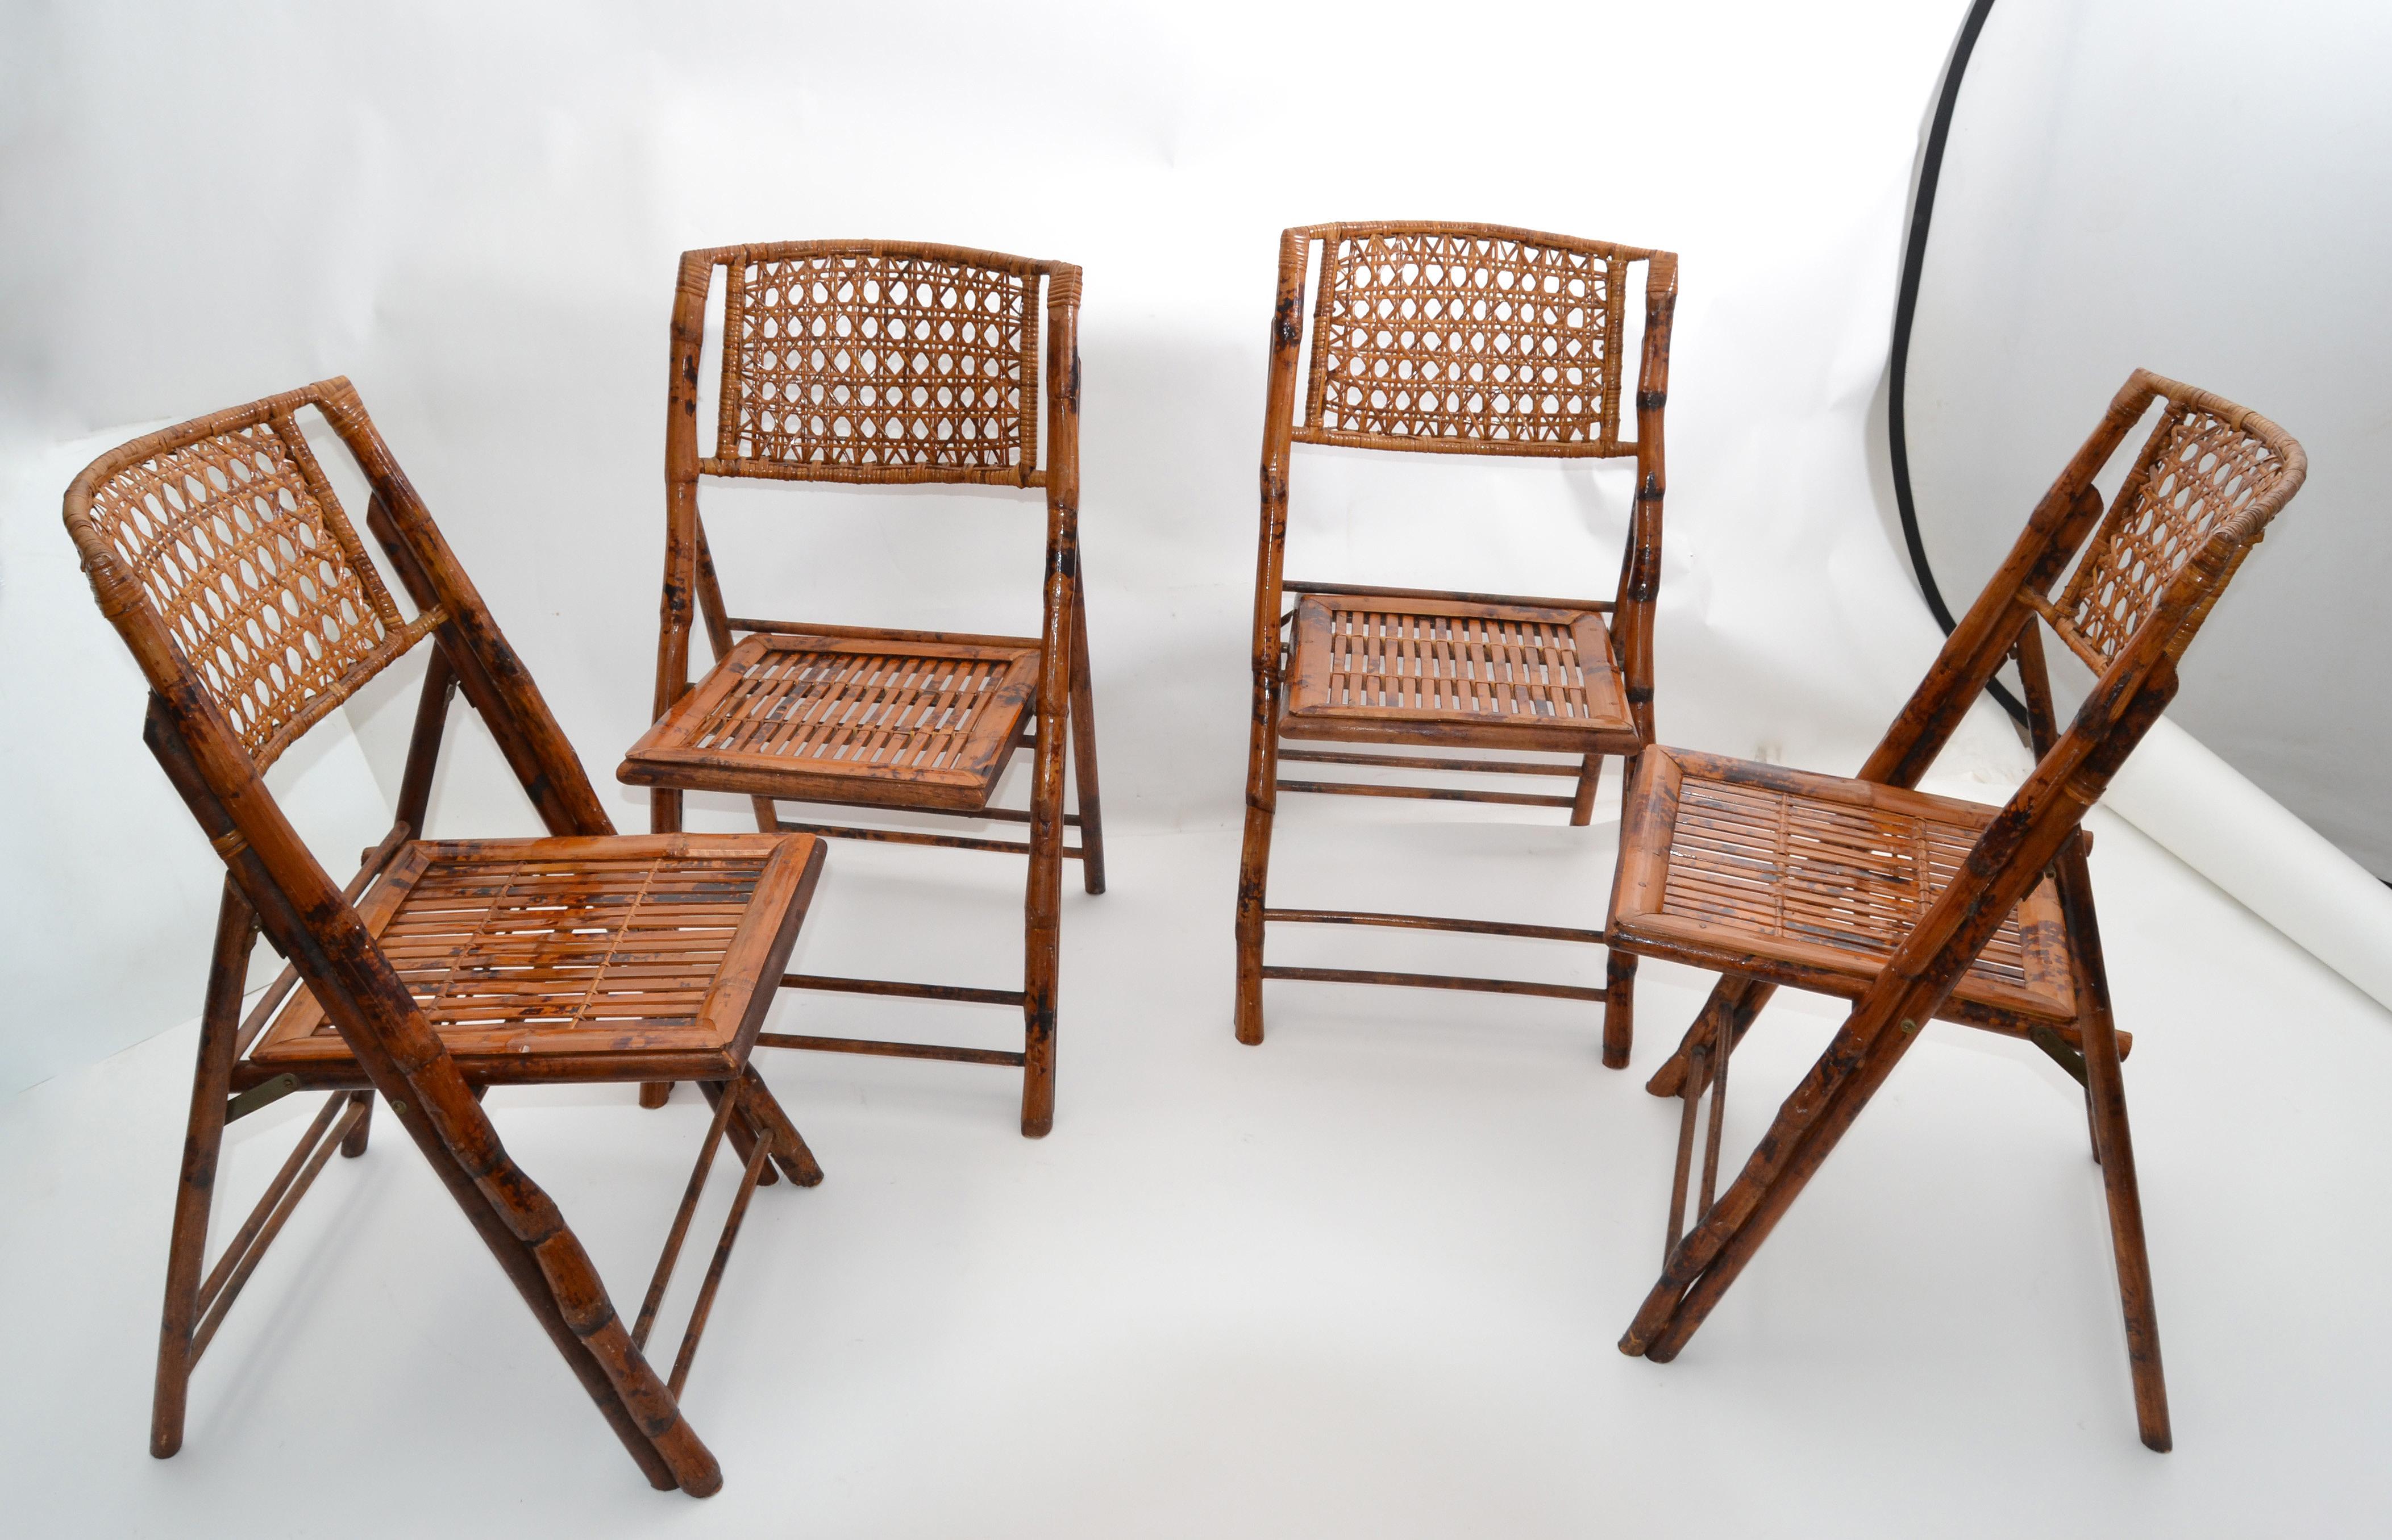 Set of 4 Bohemian style Mid-Century Modern handcrafted bamboo and cane folding chairs.
The Bistro chairs are comfortable, sturdy and easy to store.
The matching Bistro table is in our other Listings, Ref:LU886321644932.
Please take a